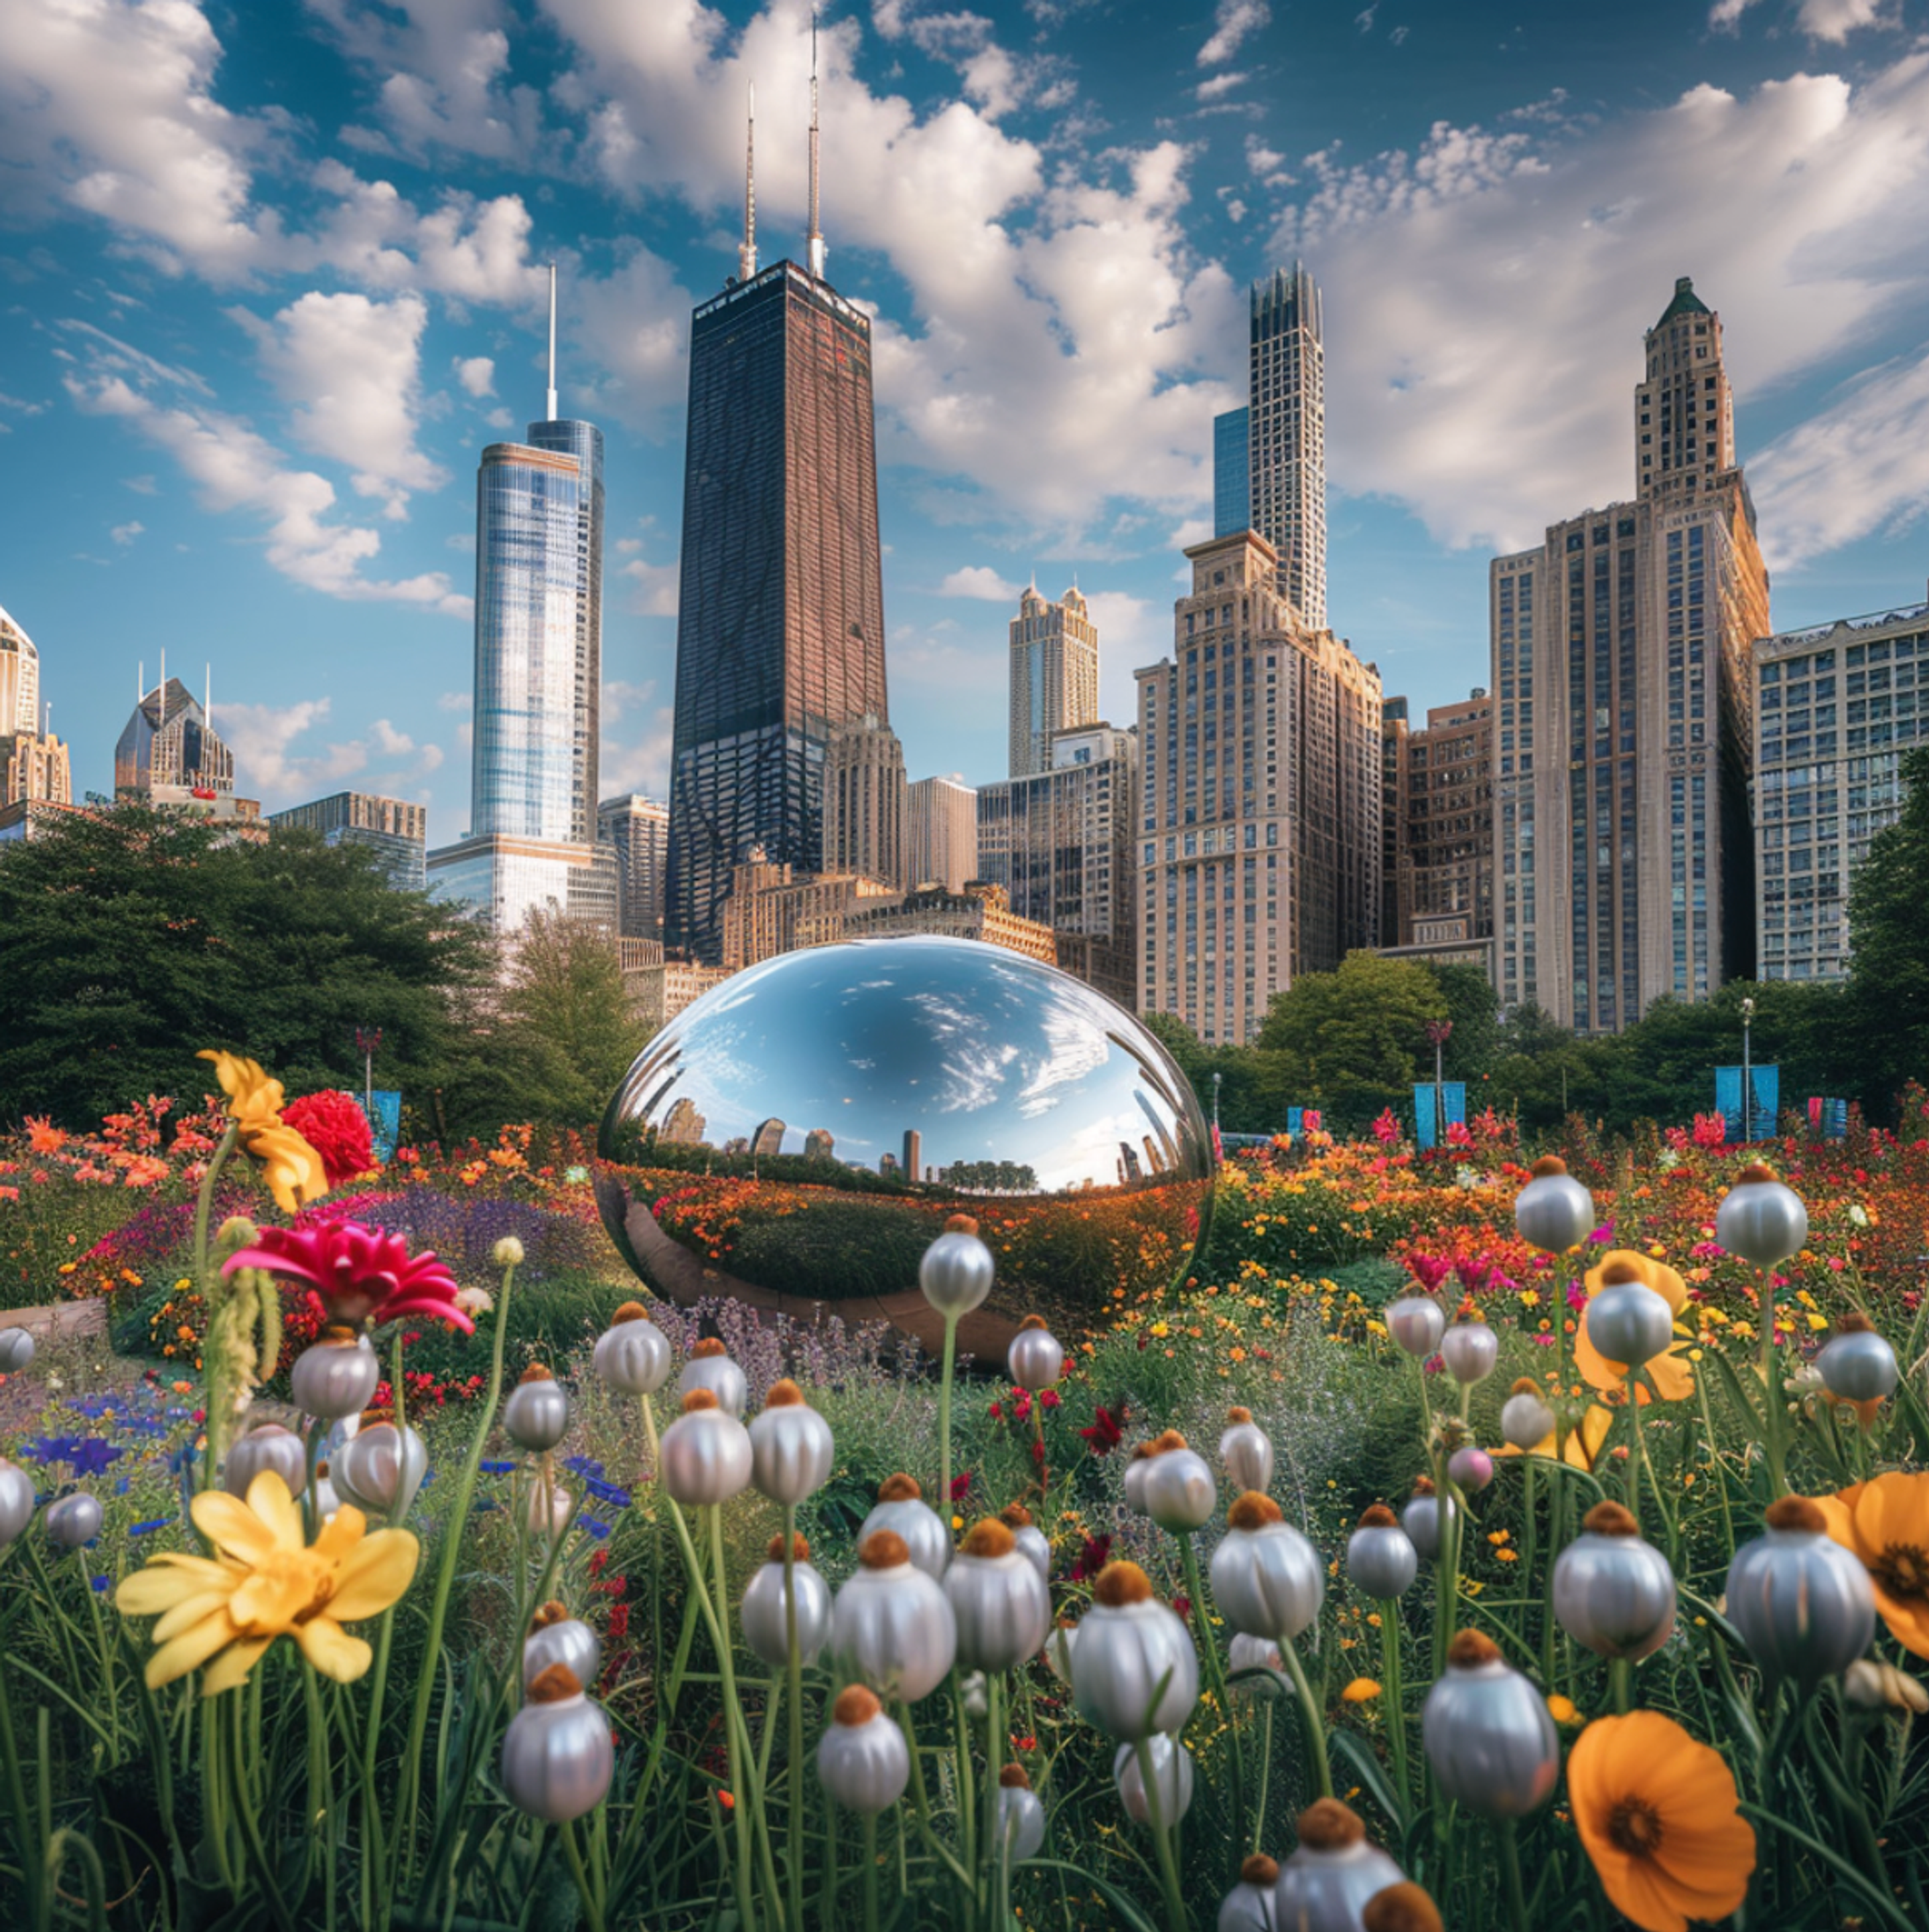 The iconic Cloud Gate sculpture, also known as 'The Bean,' in Millennium Park, Chicago, Illinois, surrounded by a lush display of summer wildflowers with the city's towering skyscrapers, including the Willis Tower, providing a dramatic backdrop.